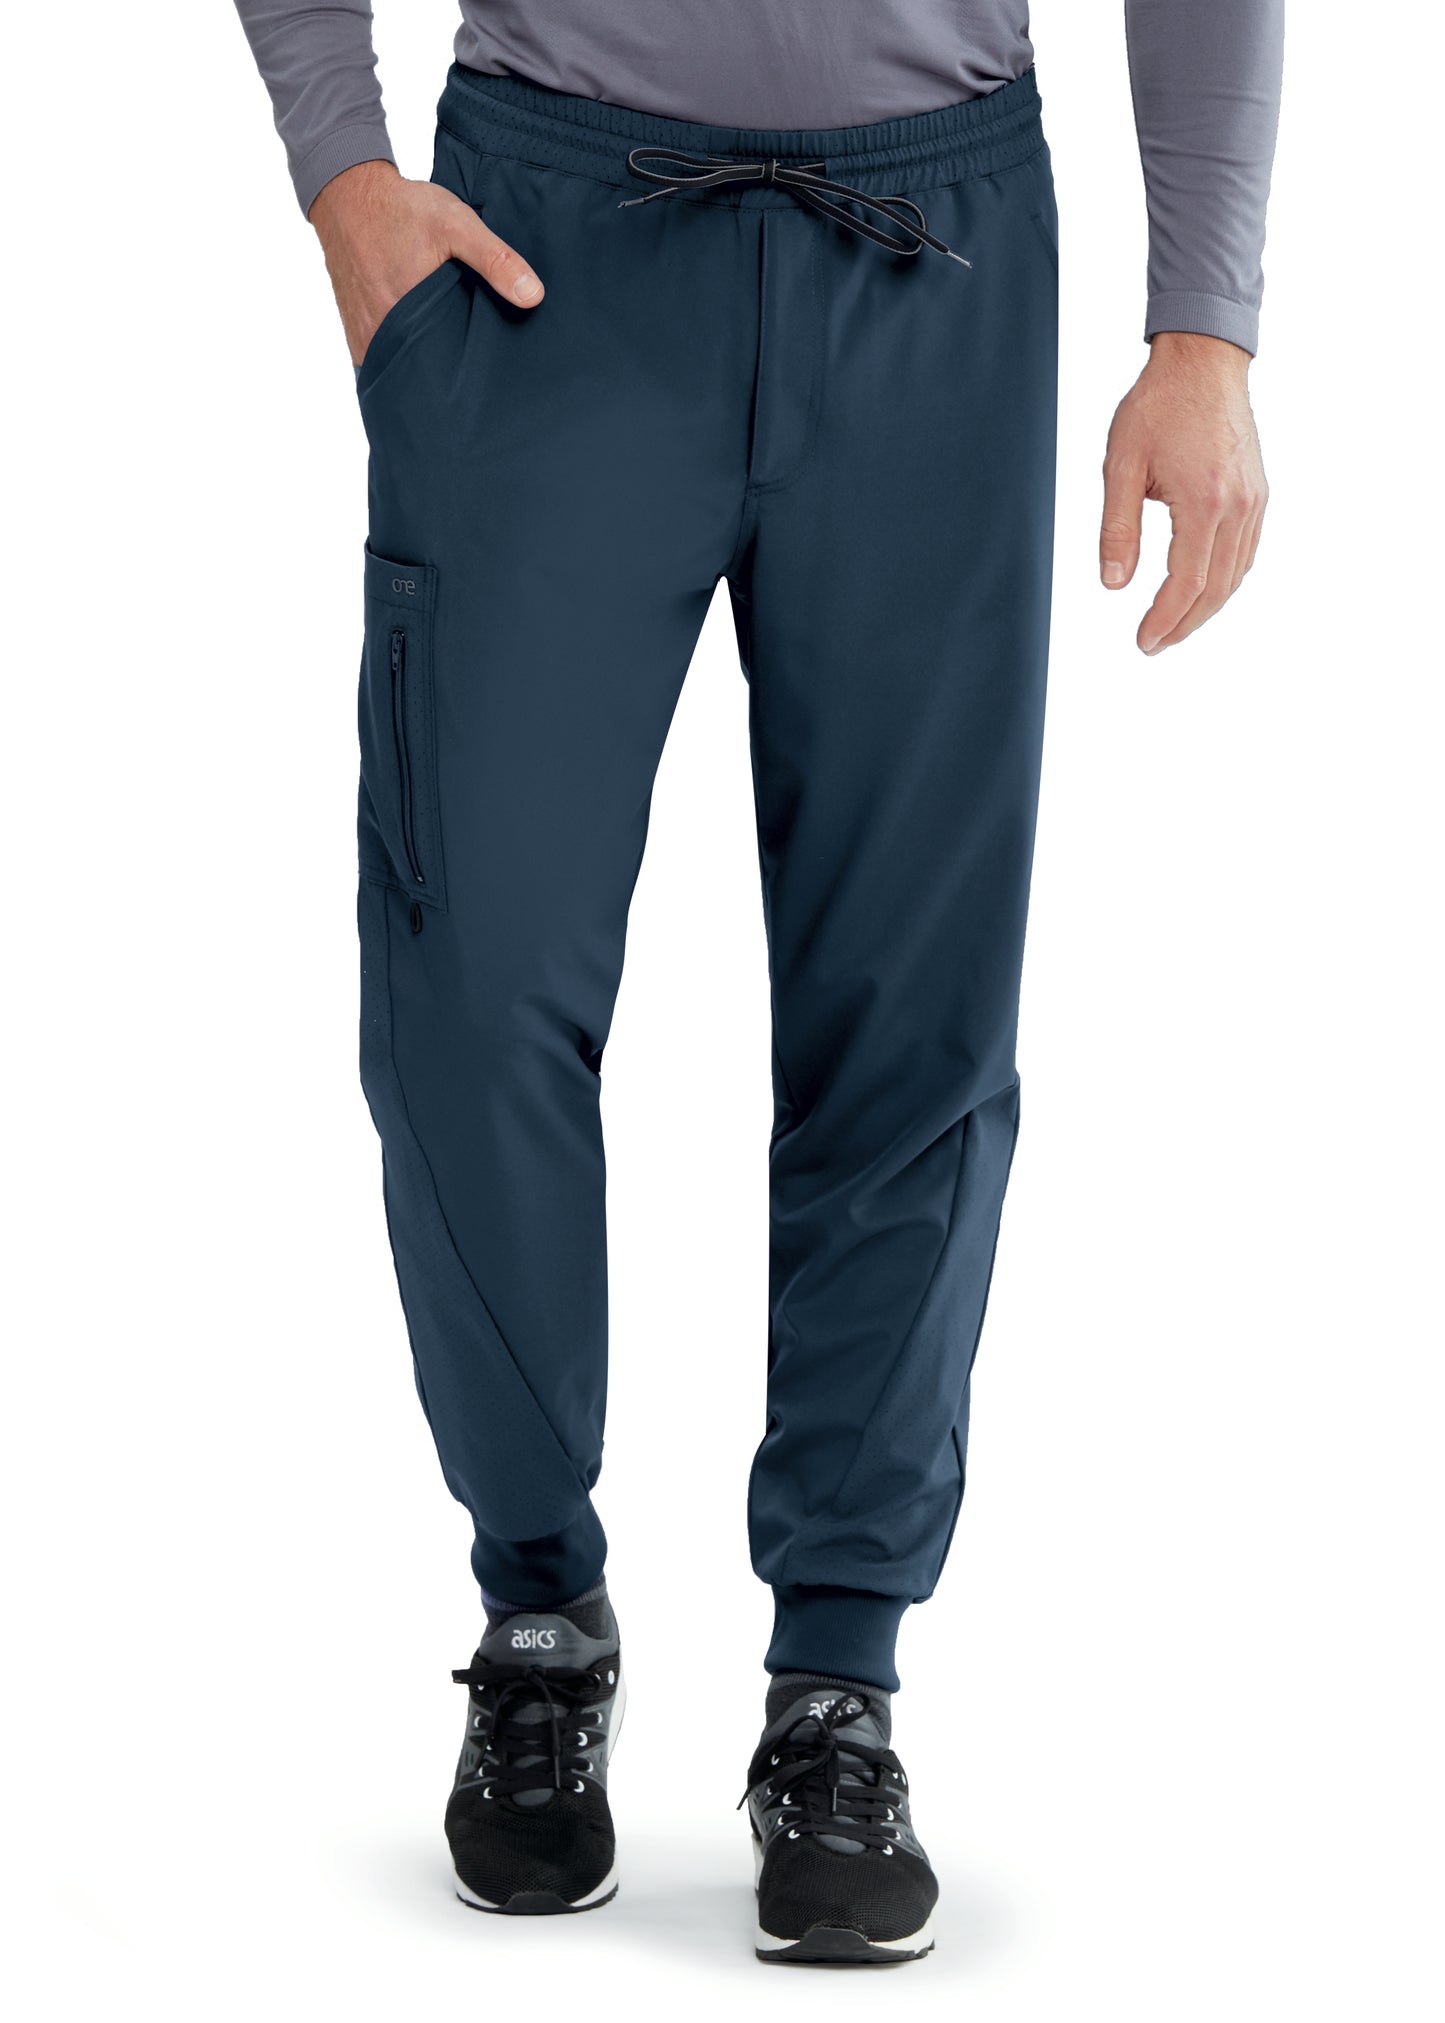 Barco One BOP520 Men's Jogger Pant in Steel Grey - Front View